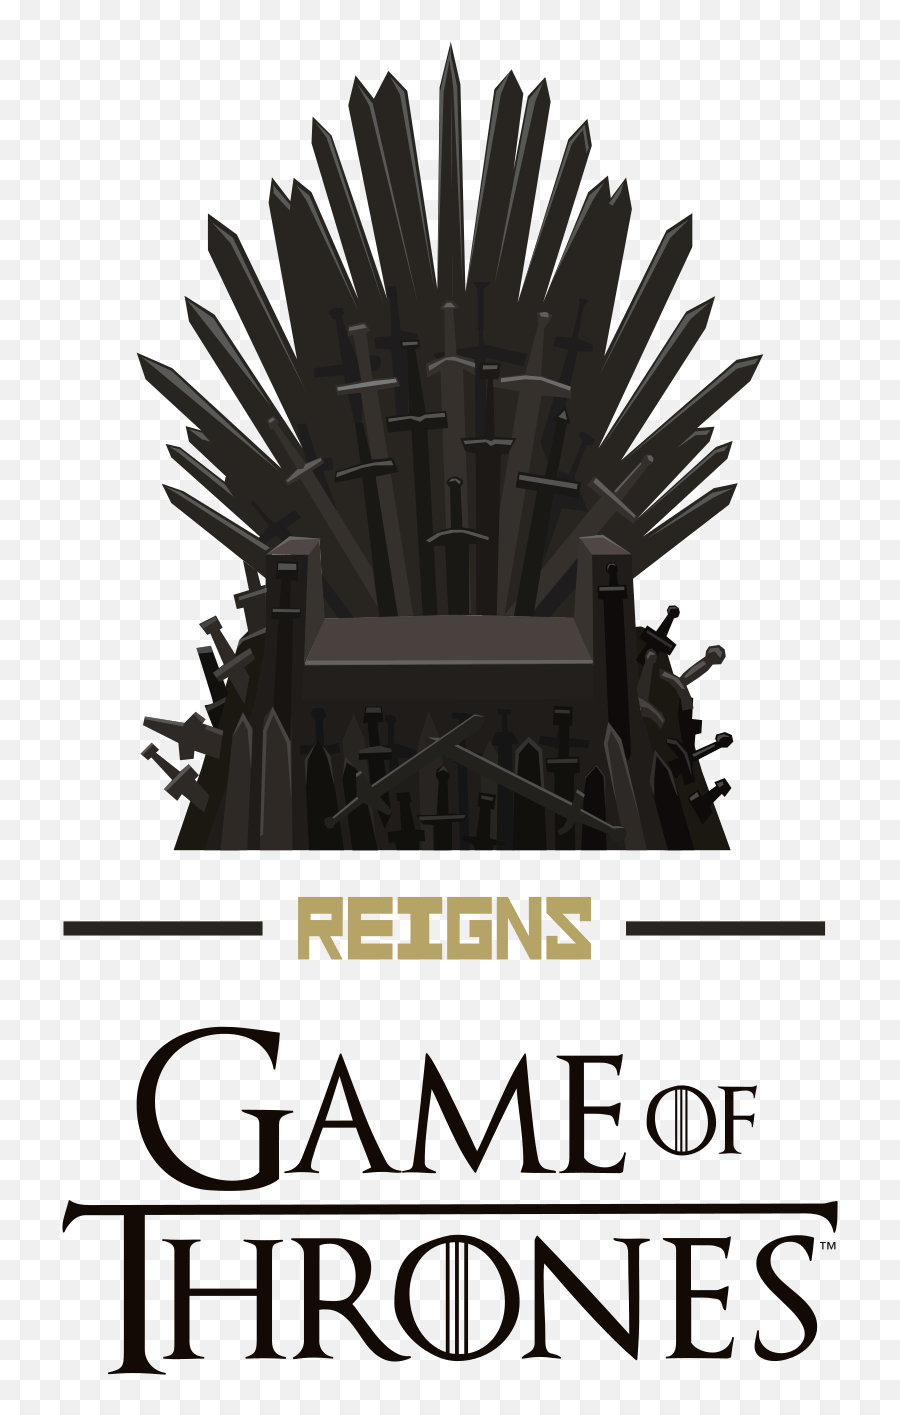 Game Of Thrones Logo PNG Transparent & SVG Vector - Freebie Supply